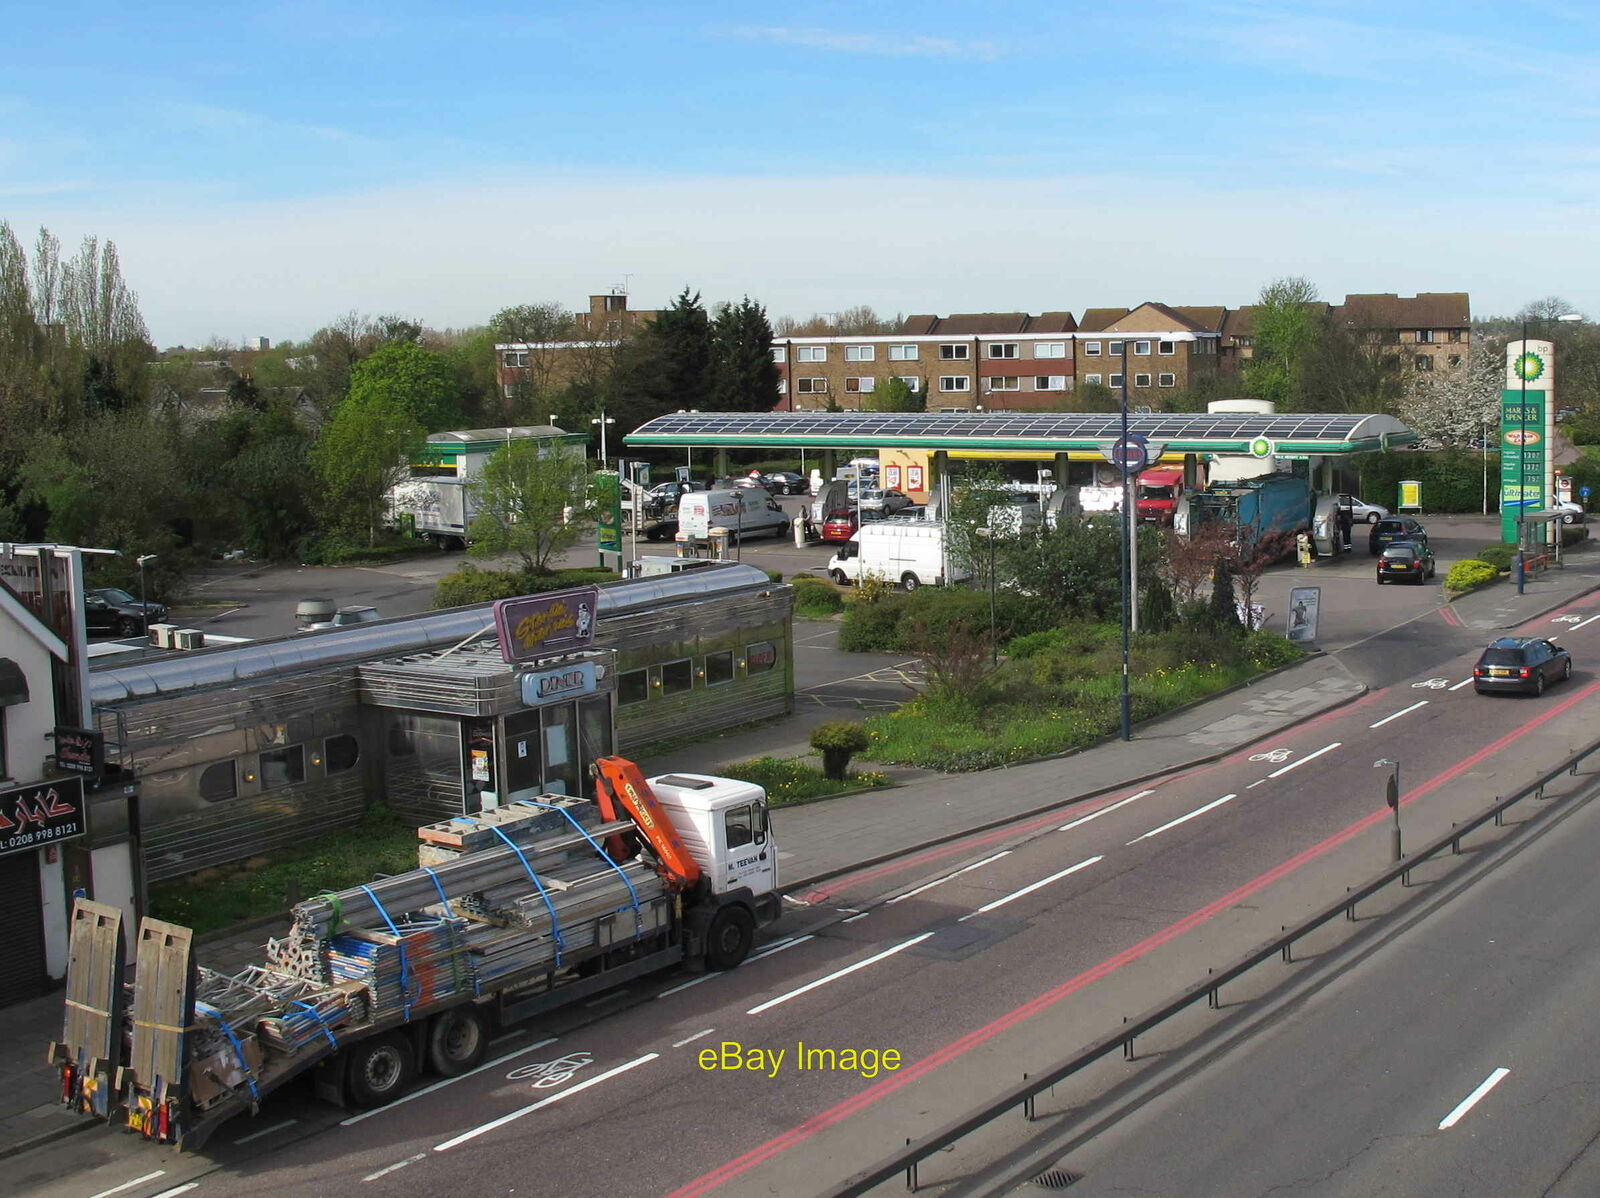 Photo 12x8 Filling station at Perivale A busy site as it is one of the las c2011